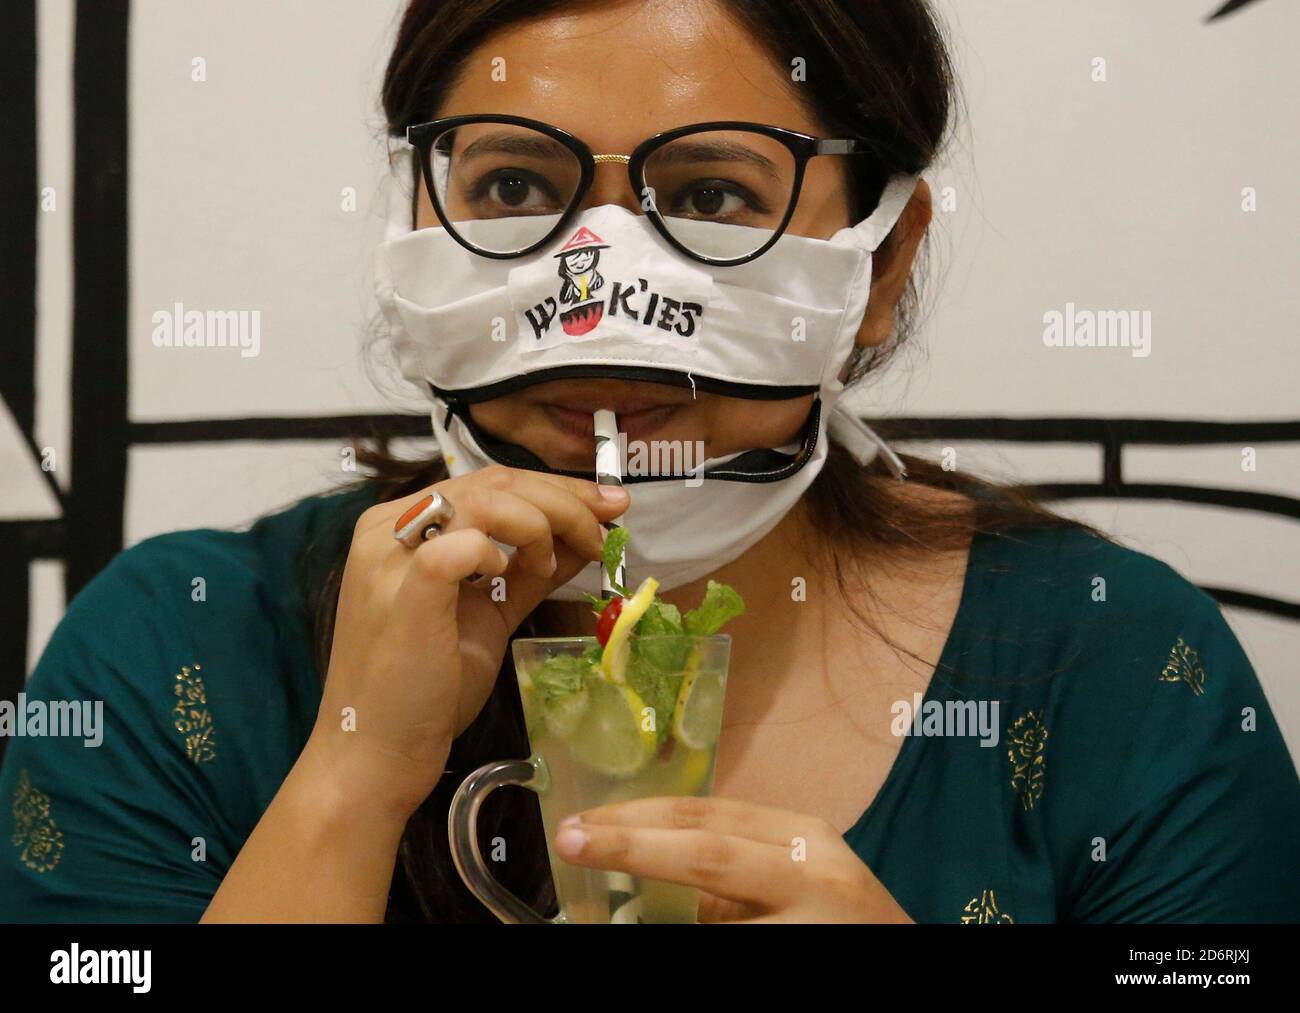 A woman drinks juice using a zip-up mask provided by Wok'ies restaurant in Kolkata, India, October 19, 2020. REUTERS/Rupak De Chowdhuri Stock Photo